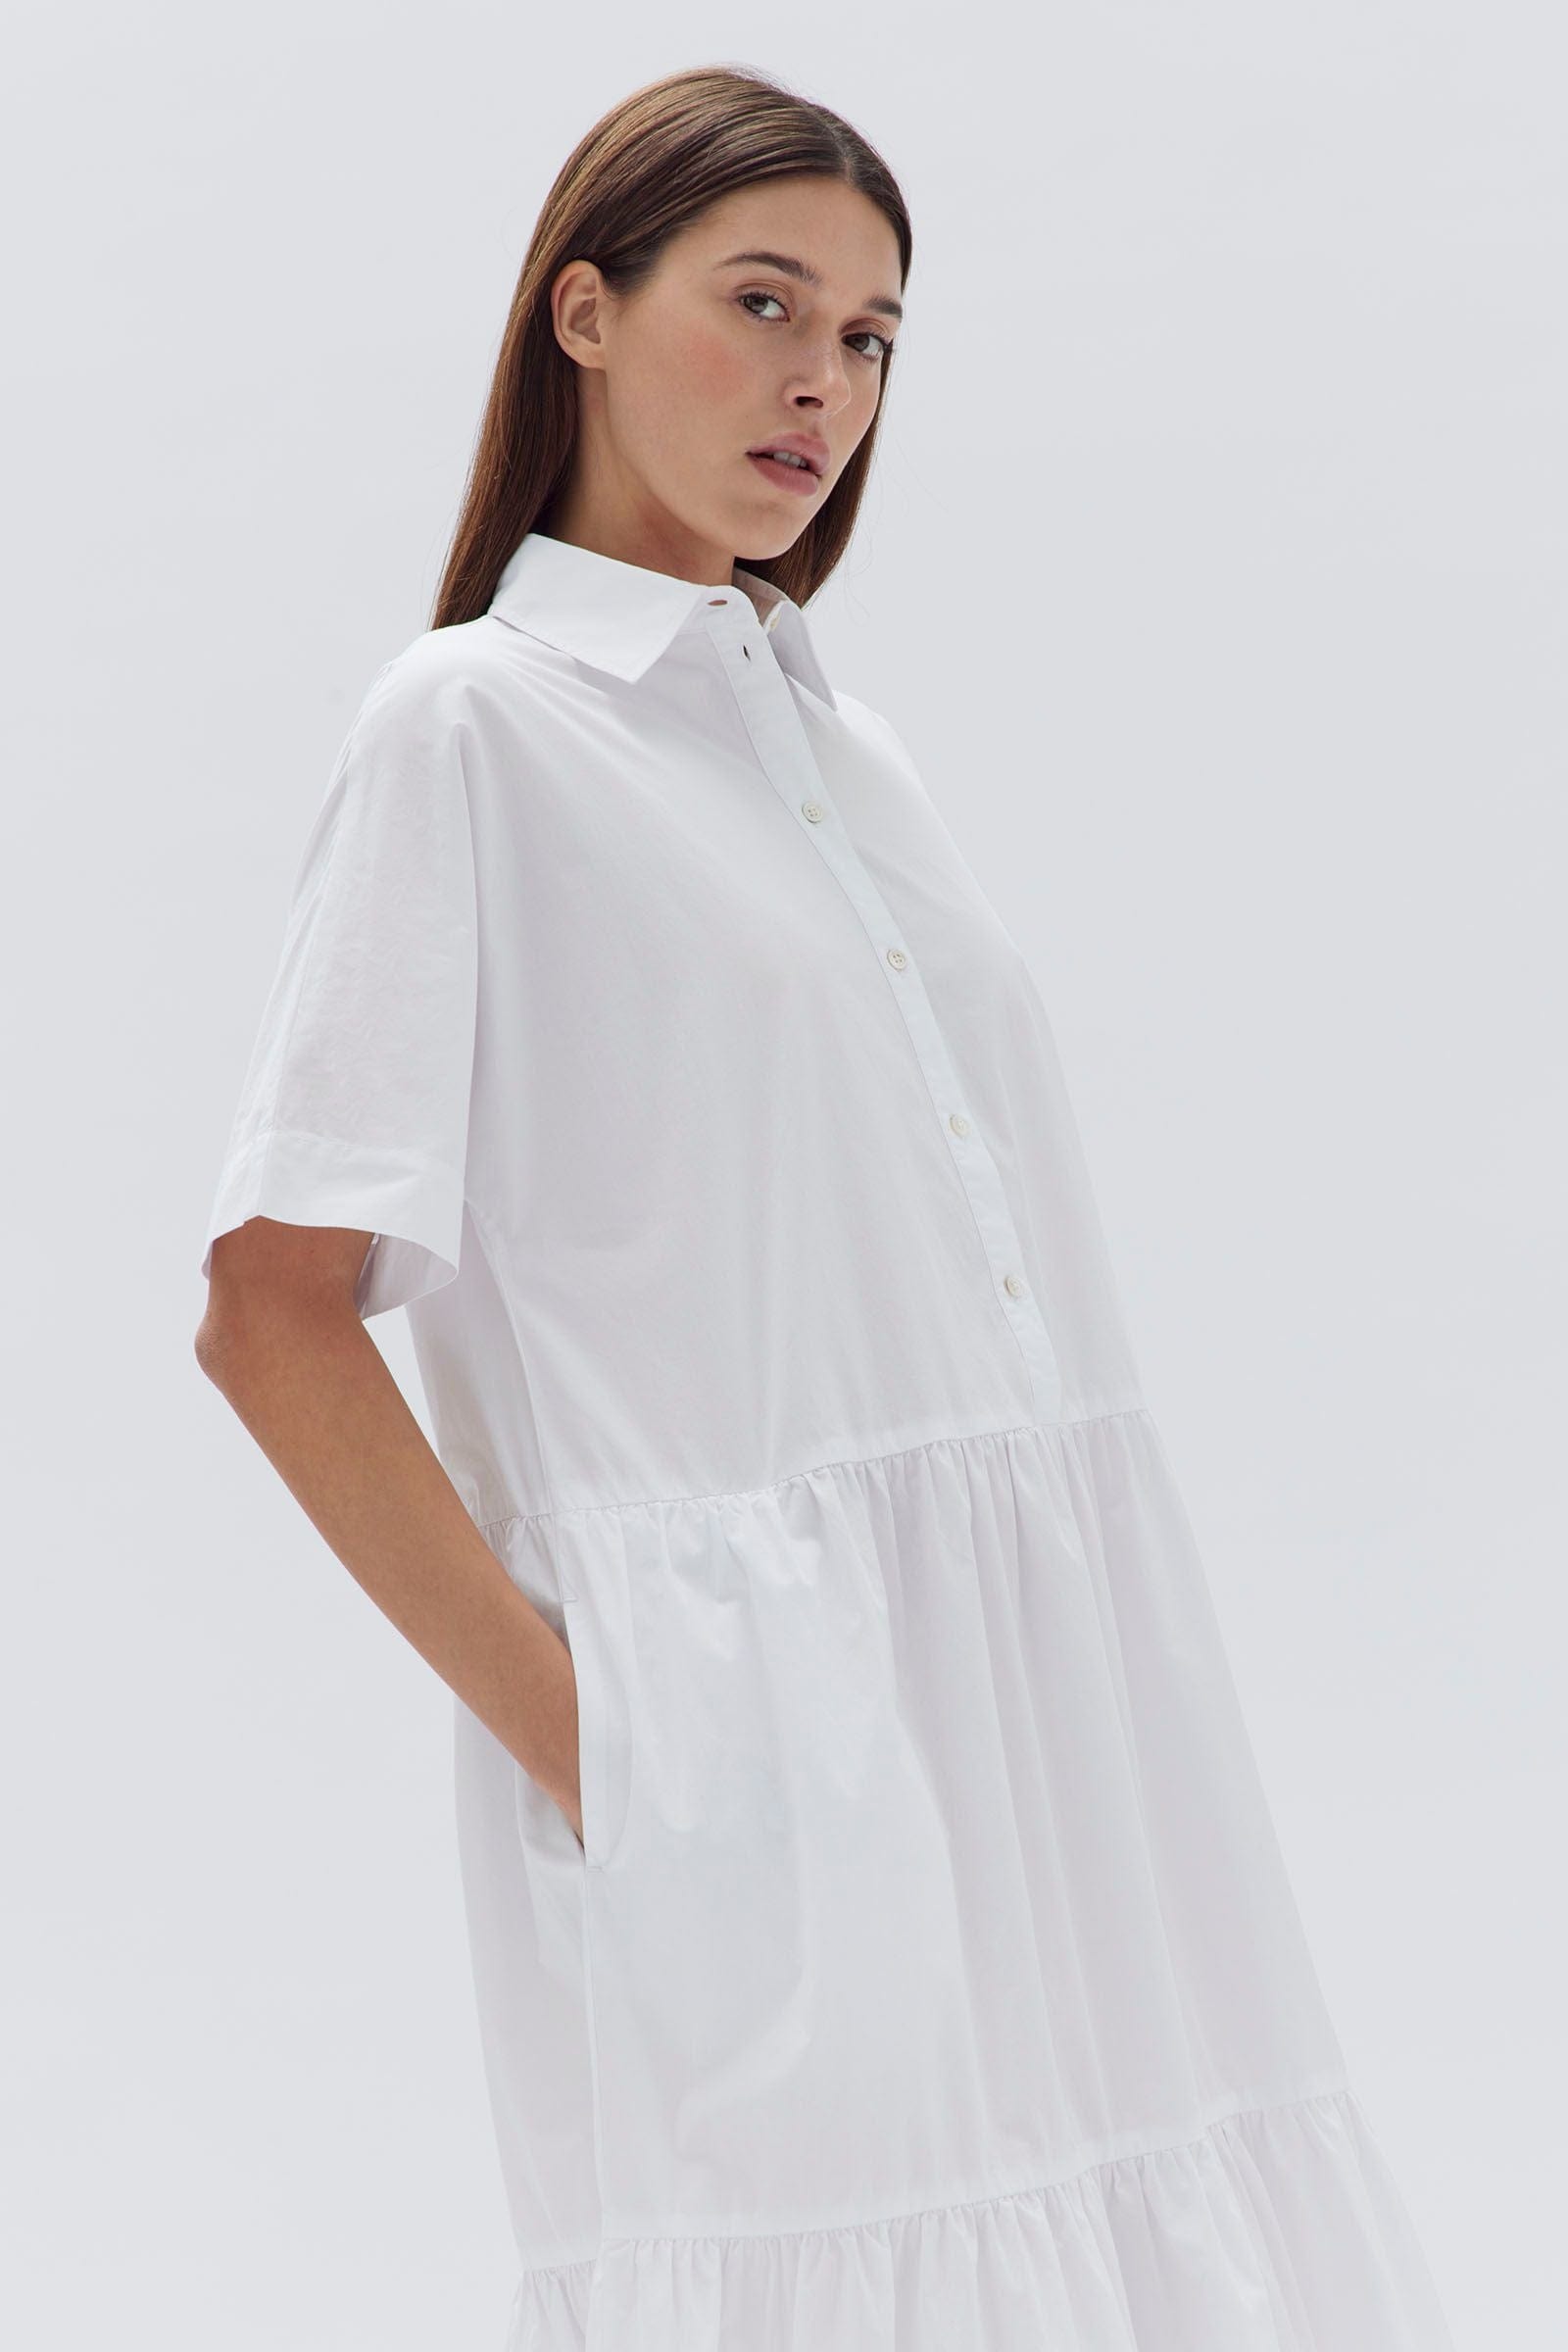 Assembly Label Dresses - Casual Assembly Label | Tiered Poplin Shirt Dress - White